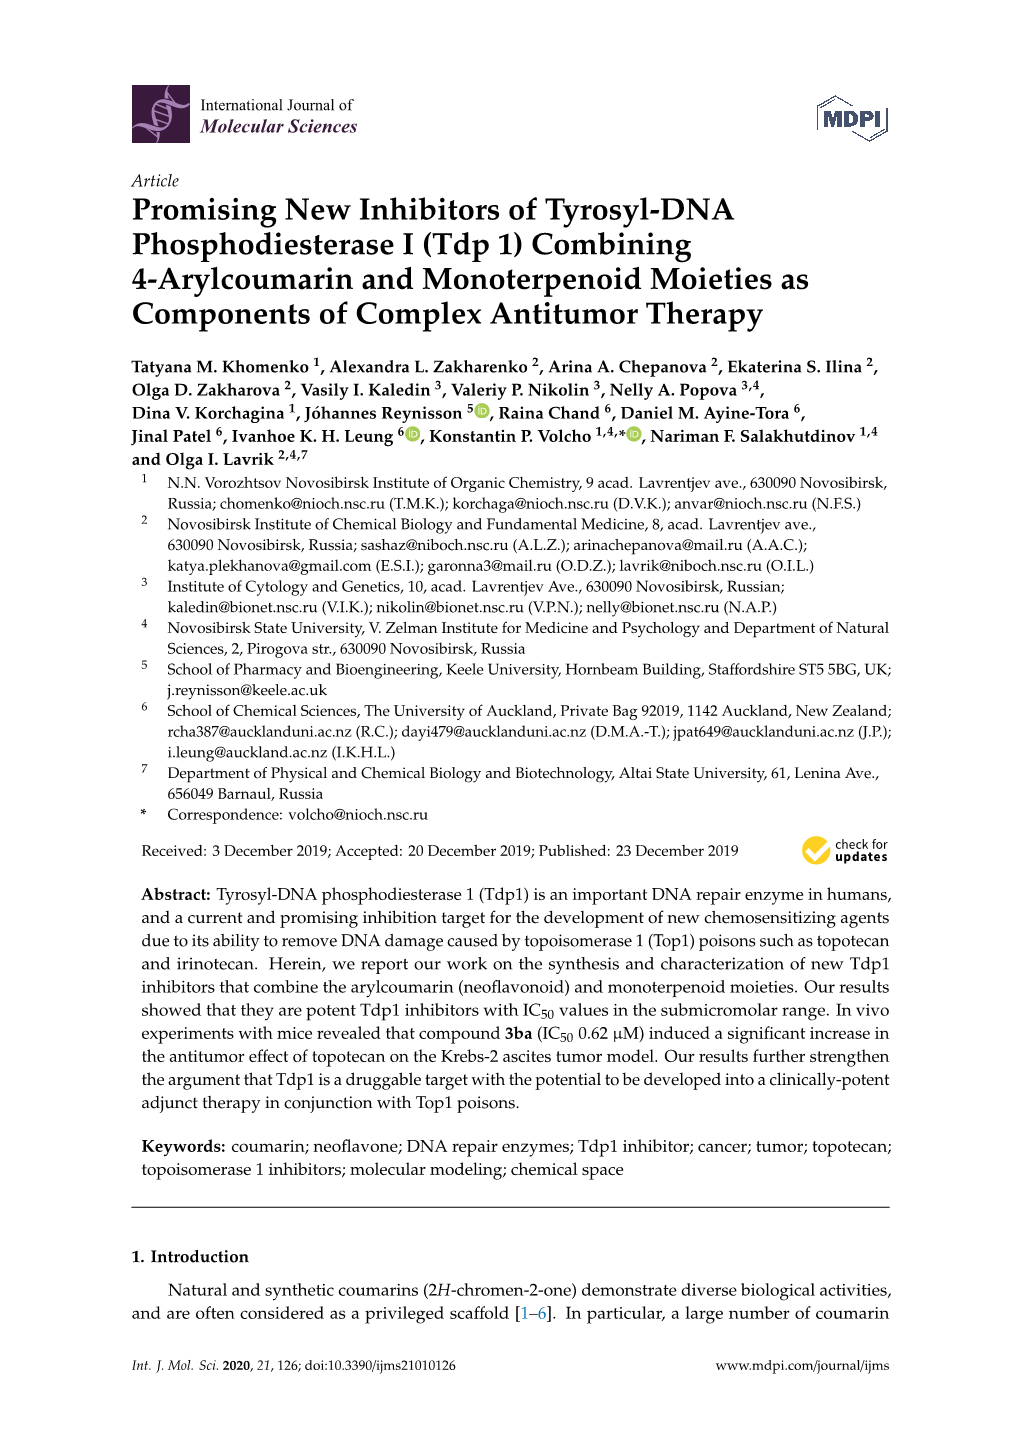 Promising New Inhibitors of Tyrosyl-DNA Phosphodiesterase I (Tdp 1) Combining 4-Arylcoumarin and Monoterpenoid Moieties As Components of Complex Antitumor Therapy